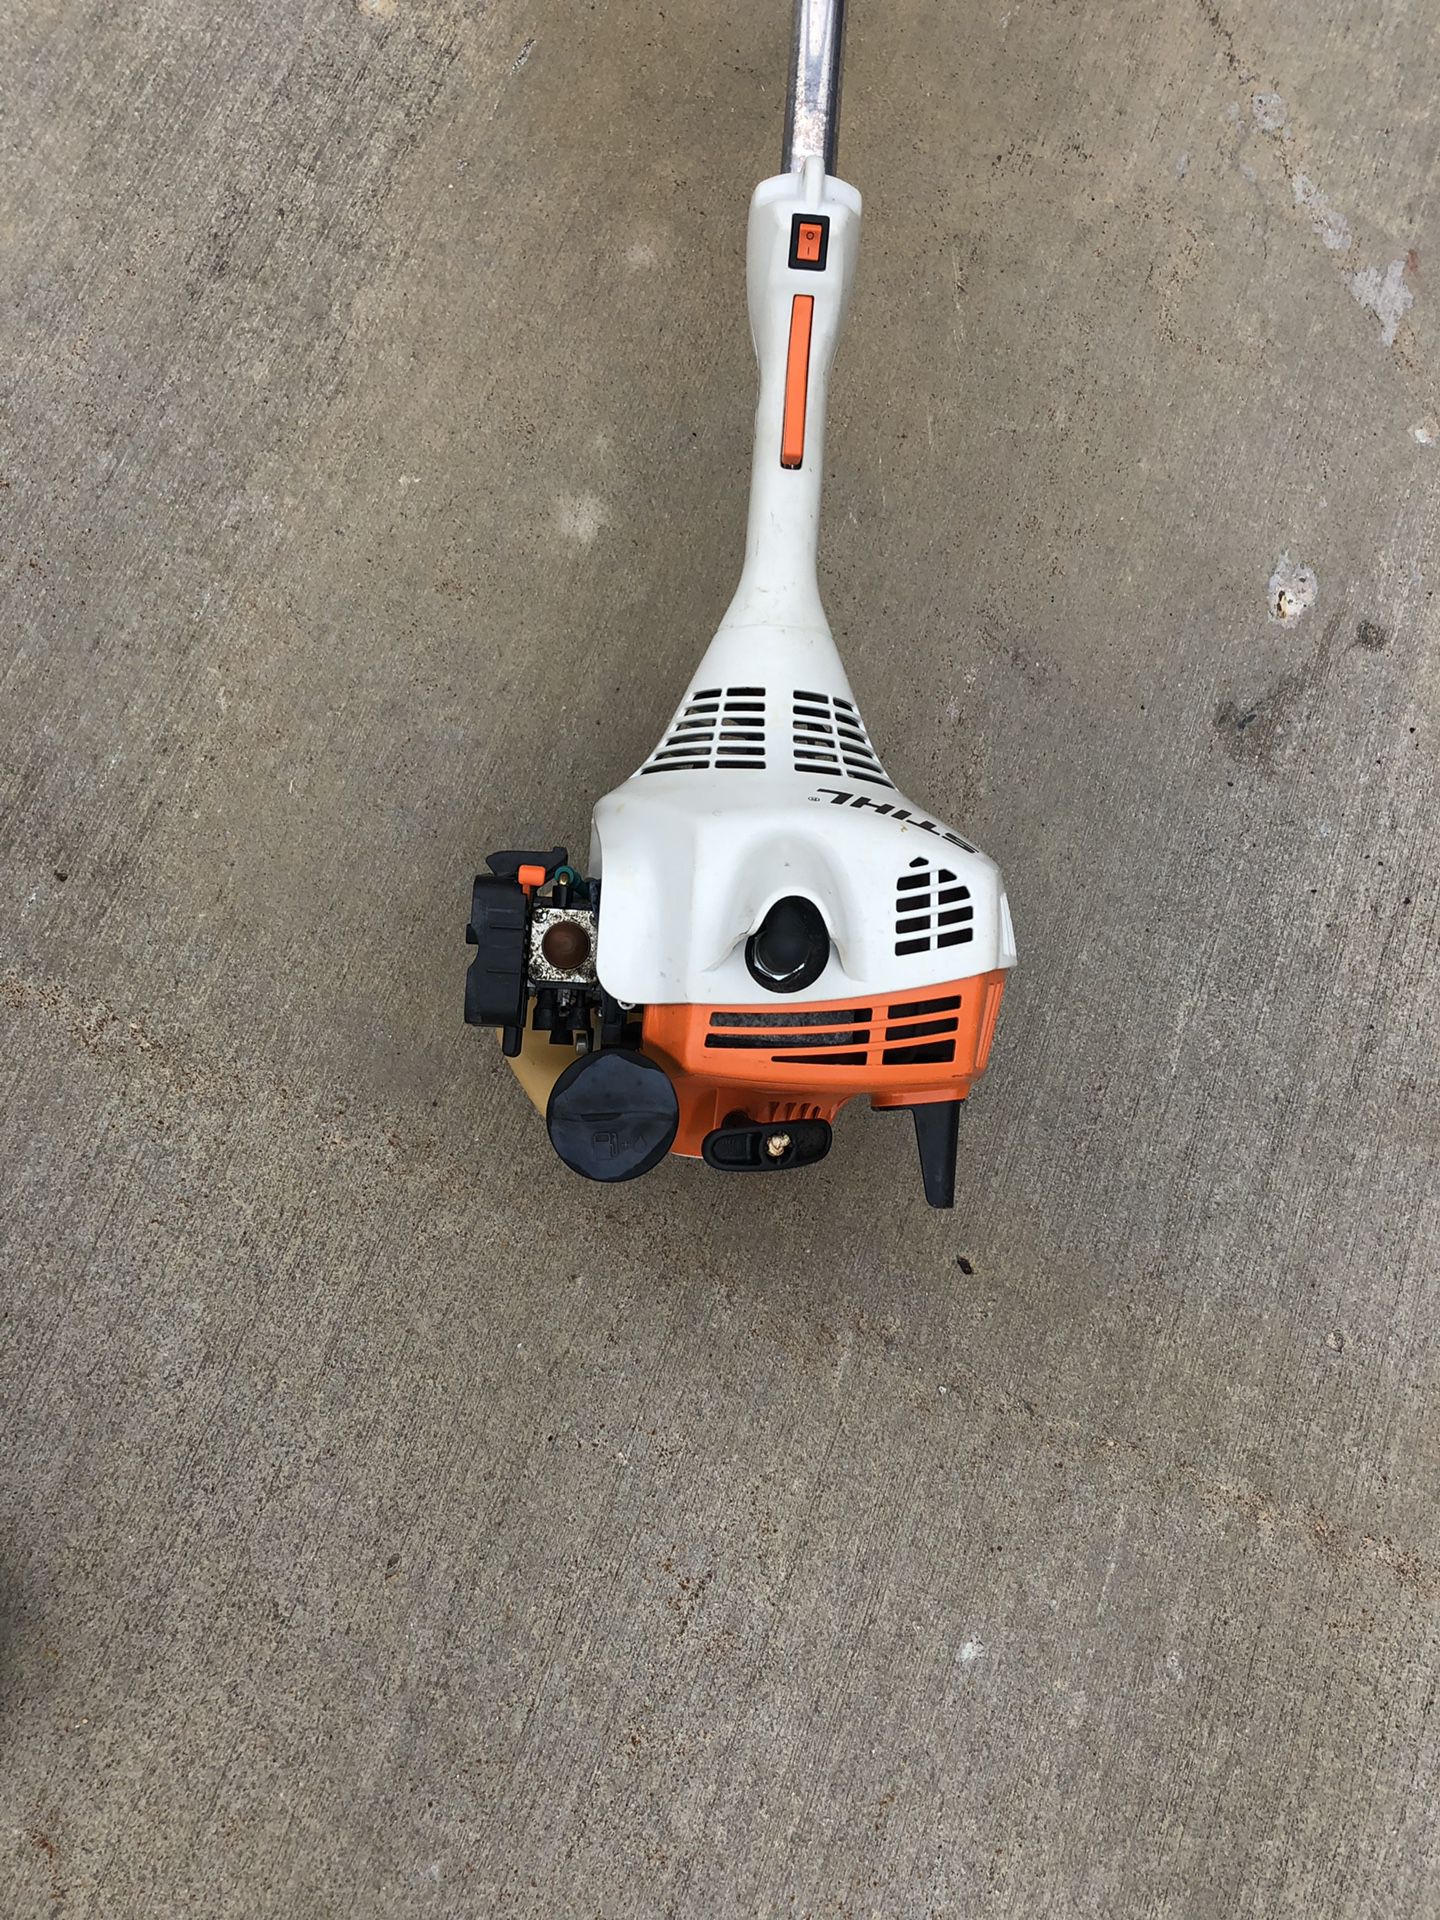 Two Stihl FS 45 trimmers